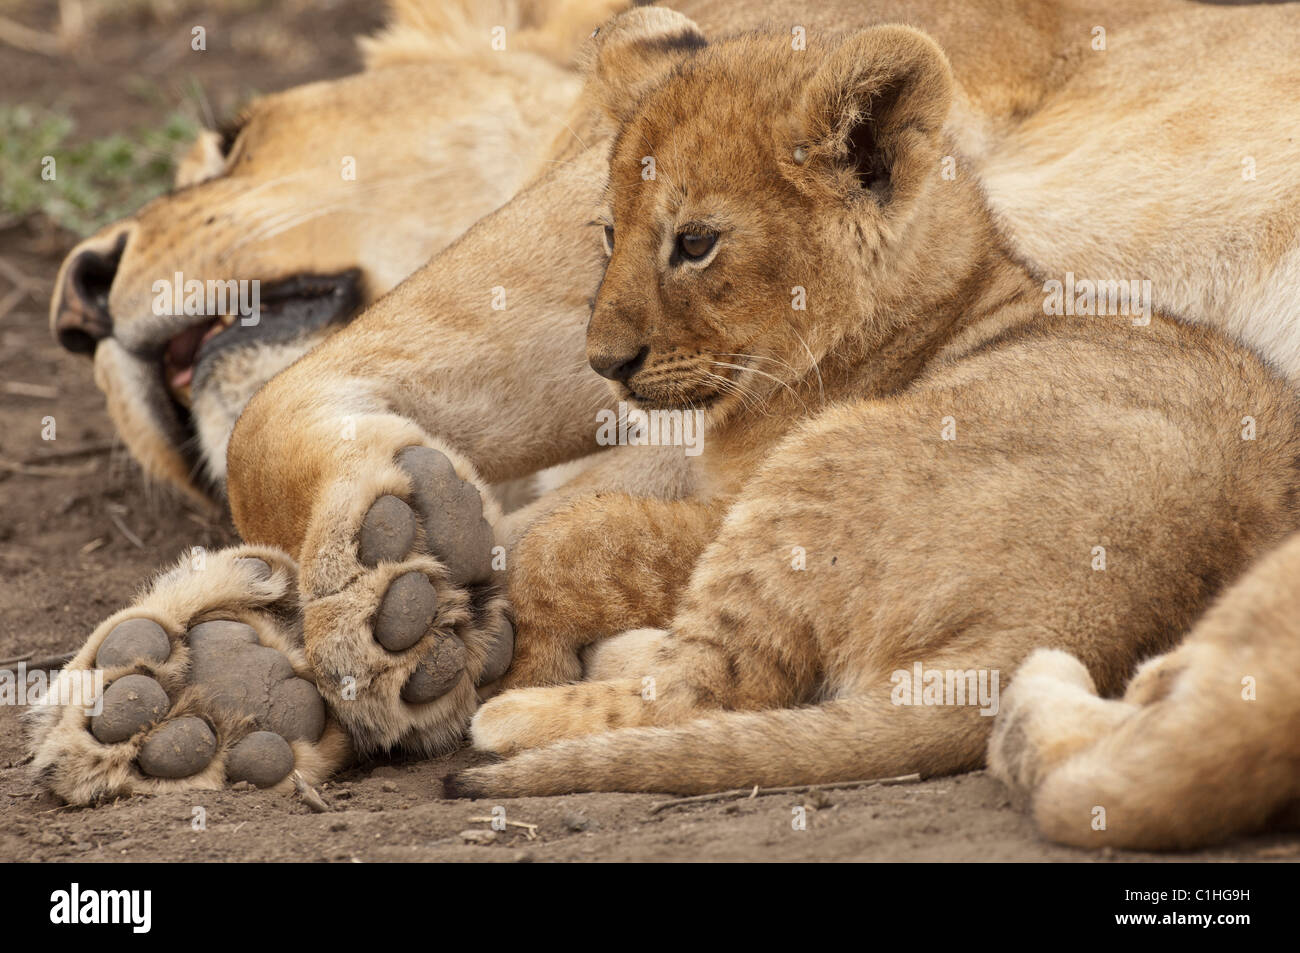 Stock photography of a small lion cub curled up in the safety of her mom's paws. Stock Photo